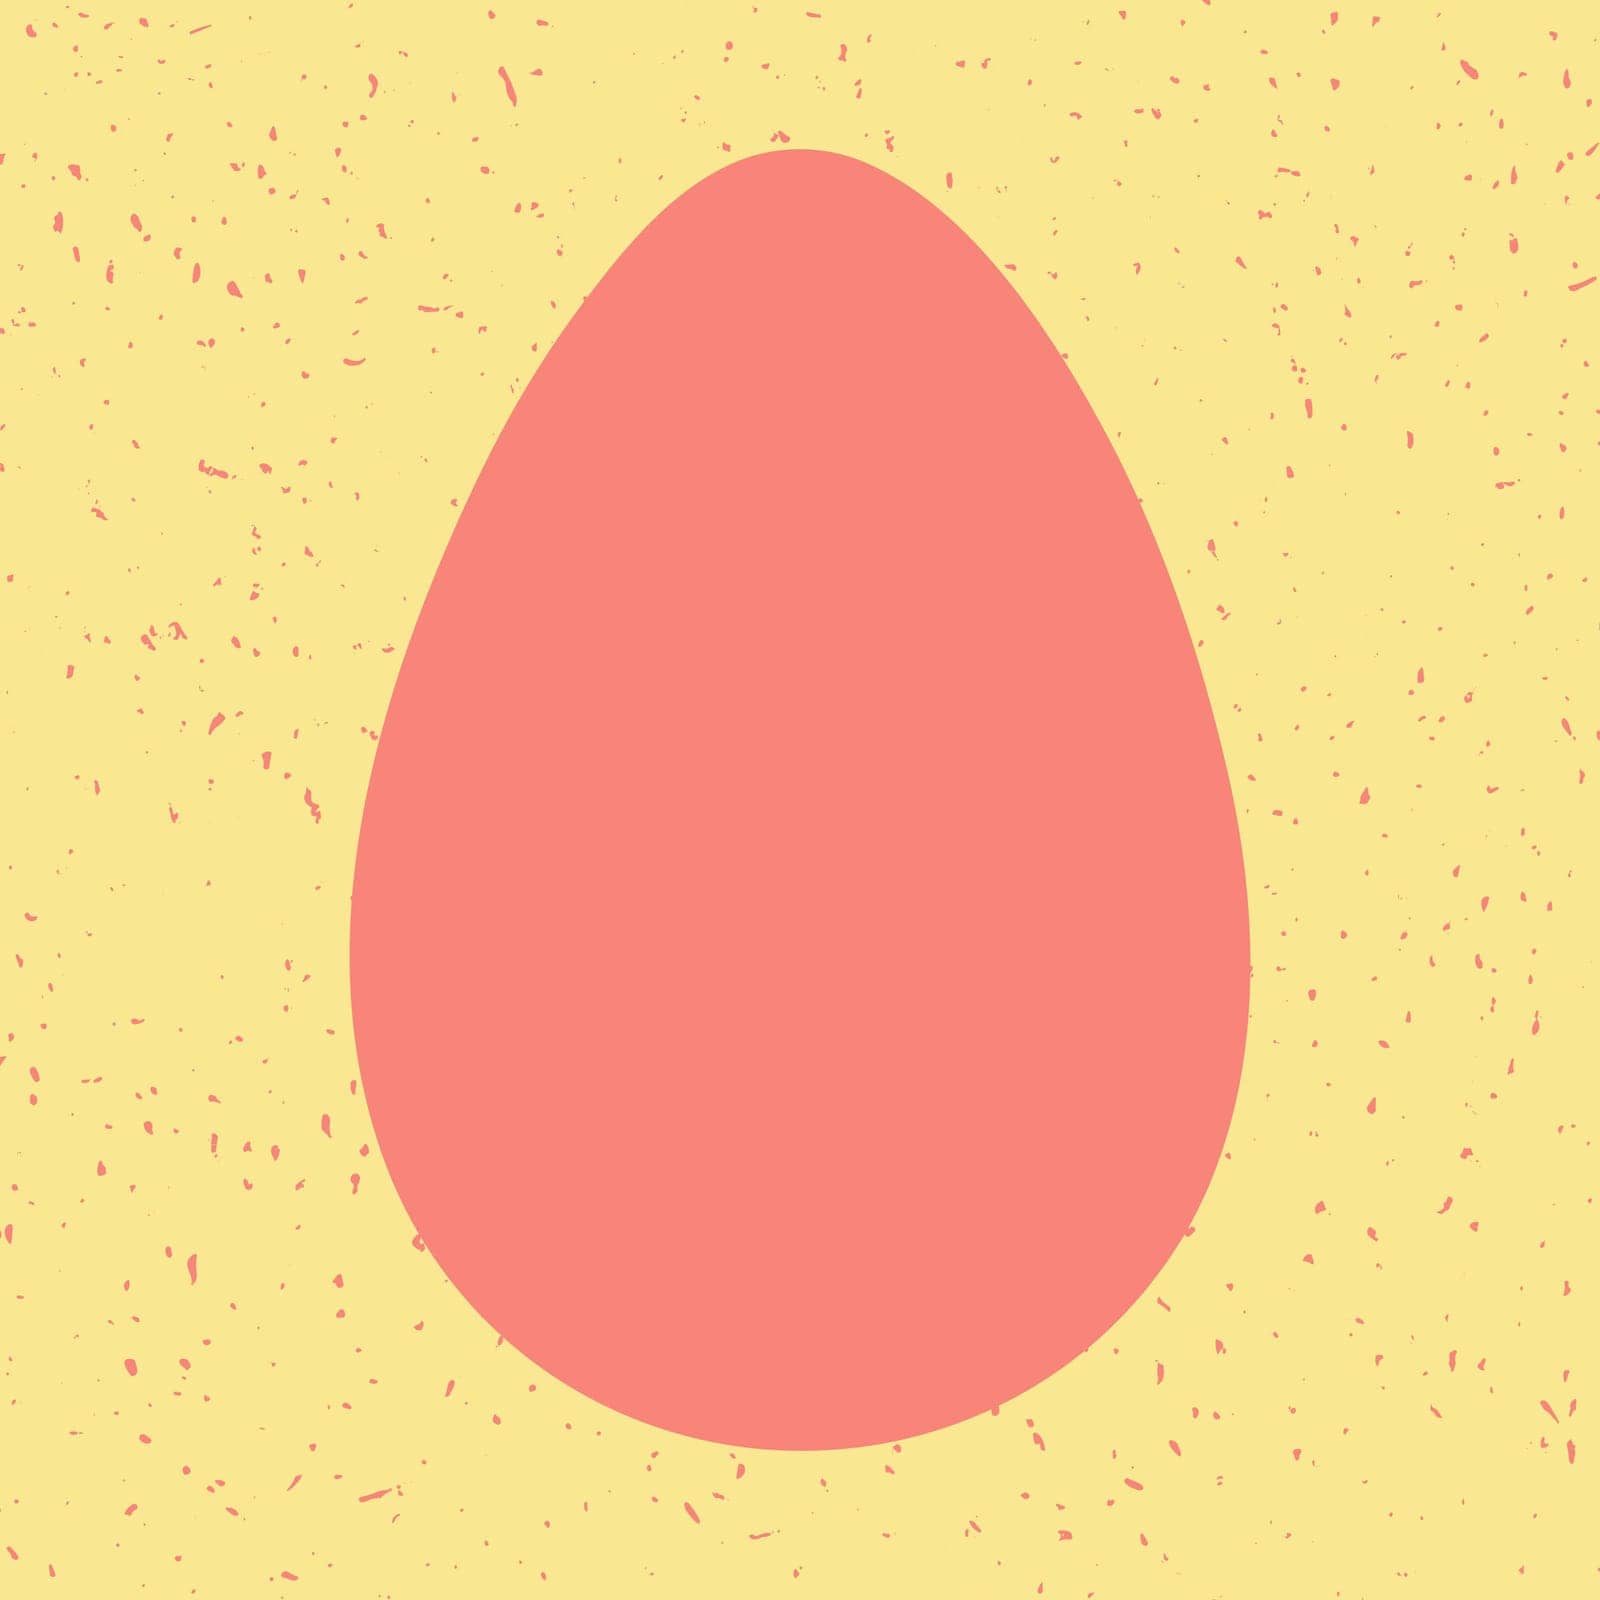 Pink Easter egg vector illustration. Colored egg shape on textured yellow background. Flat cartoon Happy Easter poster, card, icon. Modern egg hunt simple design